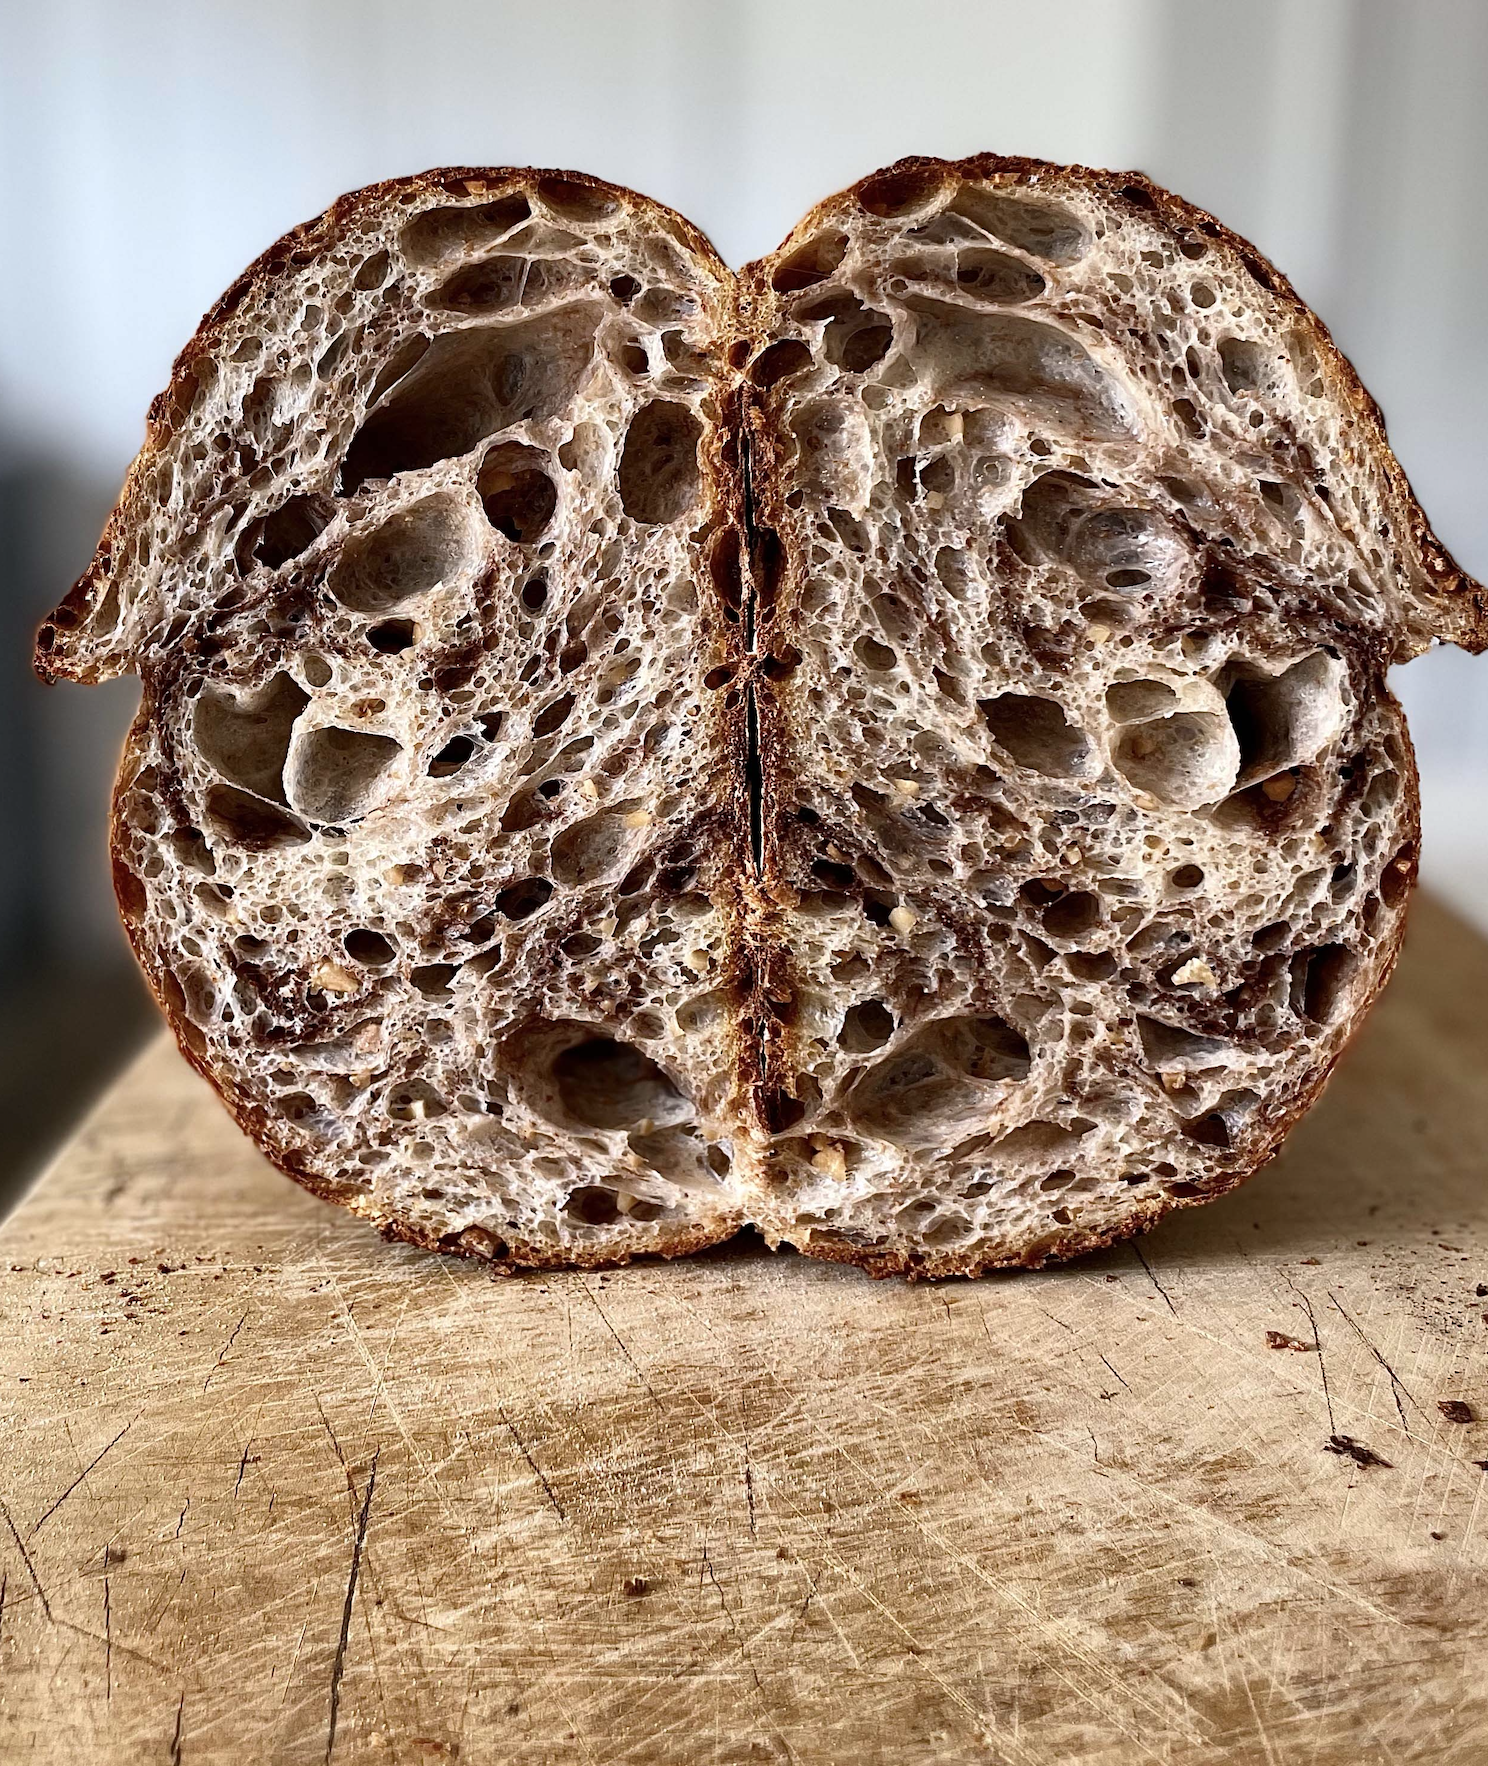 sourdough bread influencer home baker classes teaching recipes trouble shooting help support in England United Kingdom from Marie Lester of @MarieLesterBaker on Instagram 34